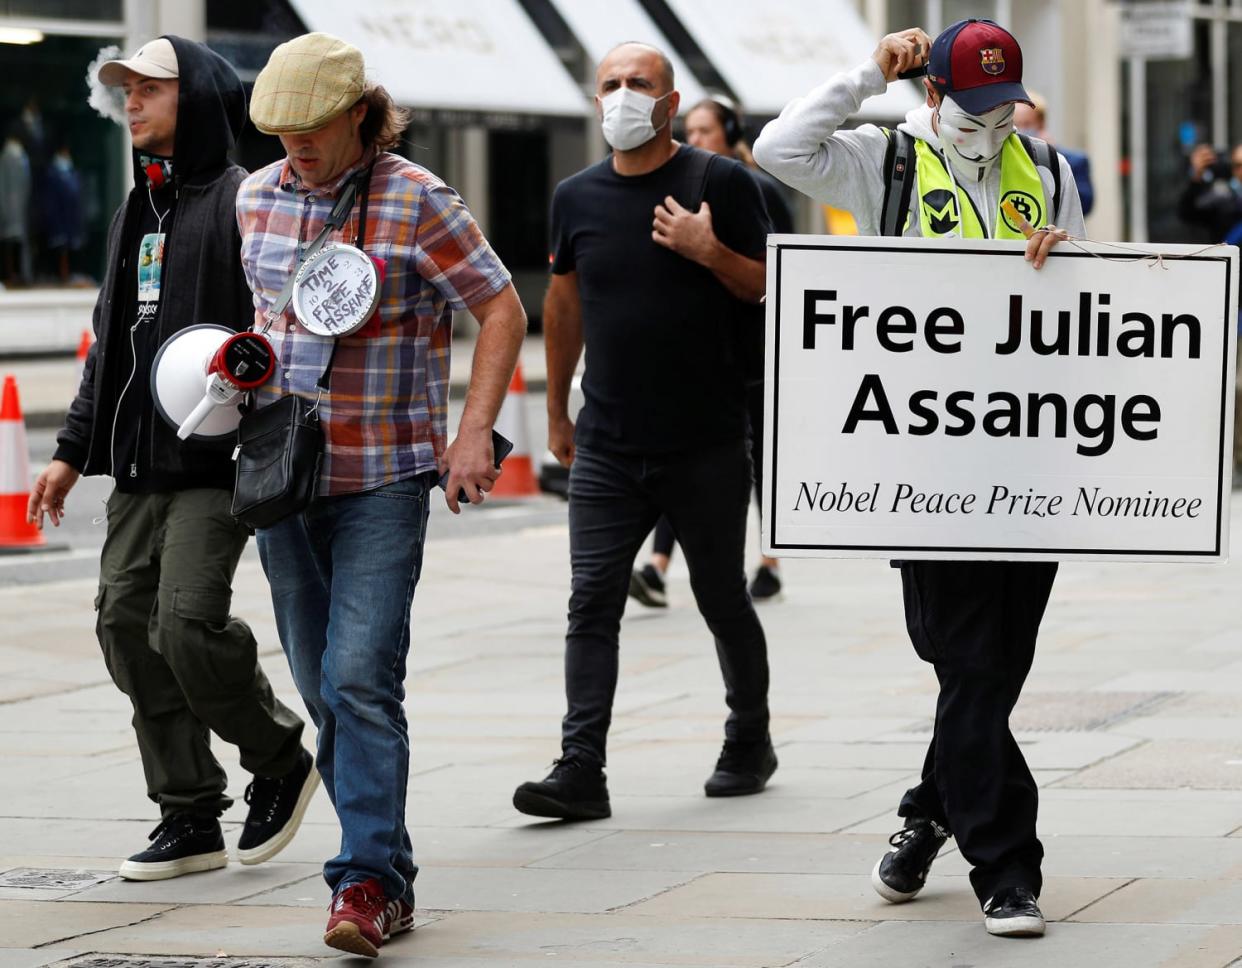 Image: Supporters of WikiLeaks founder Julian Assange arrive at the Old Bailey, the Central Criminal Court ahead of a hearing to decide whether Assange should be extradited to the United States, in London, Britain (Peter Nicholls / Reuters)